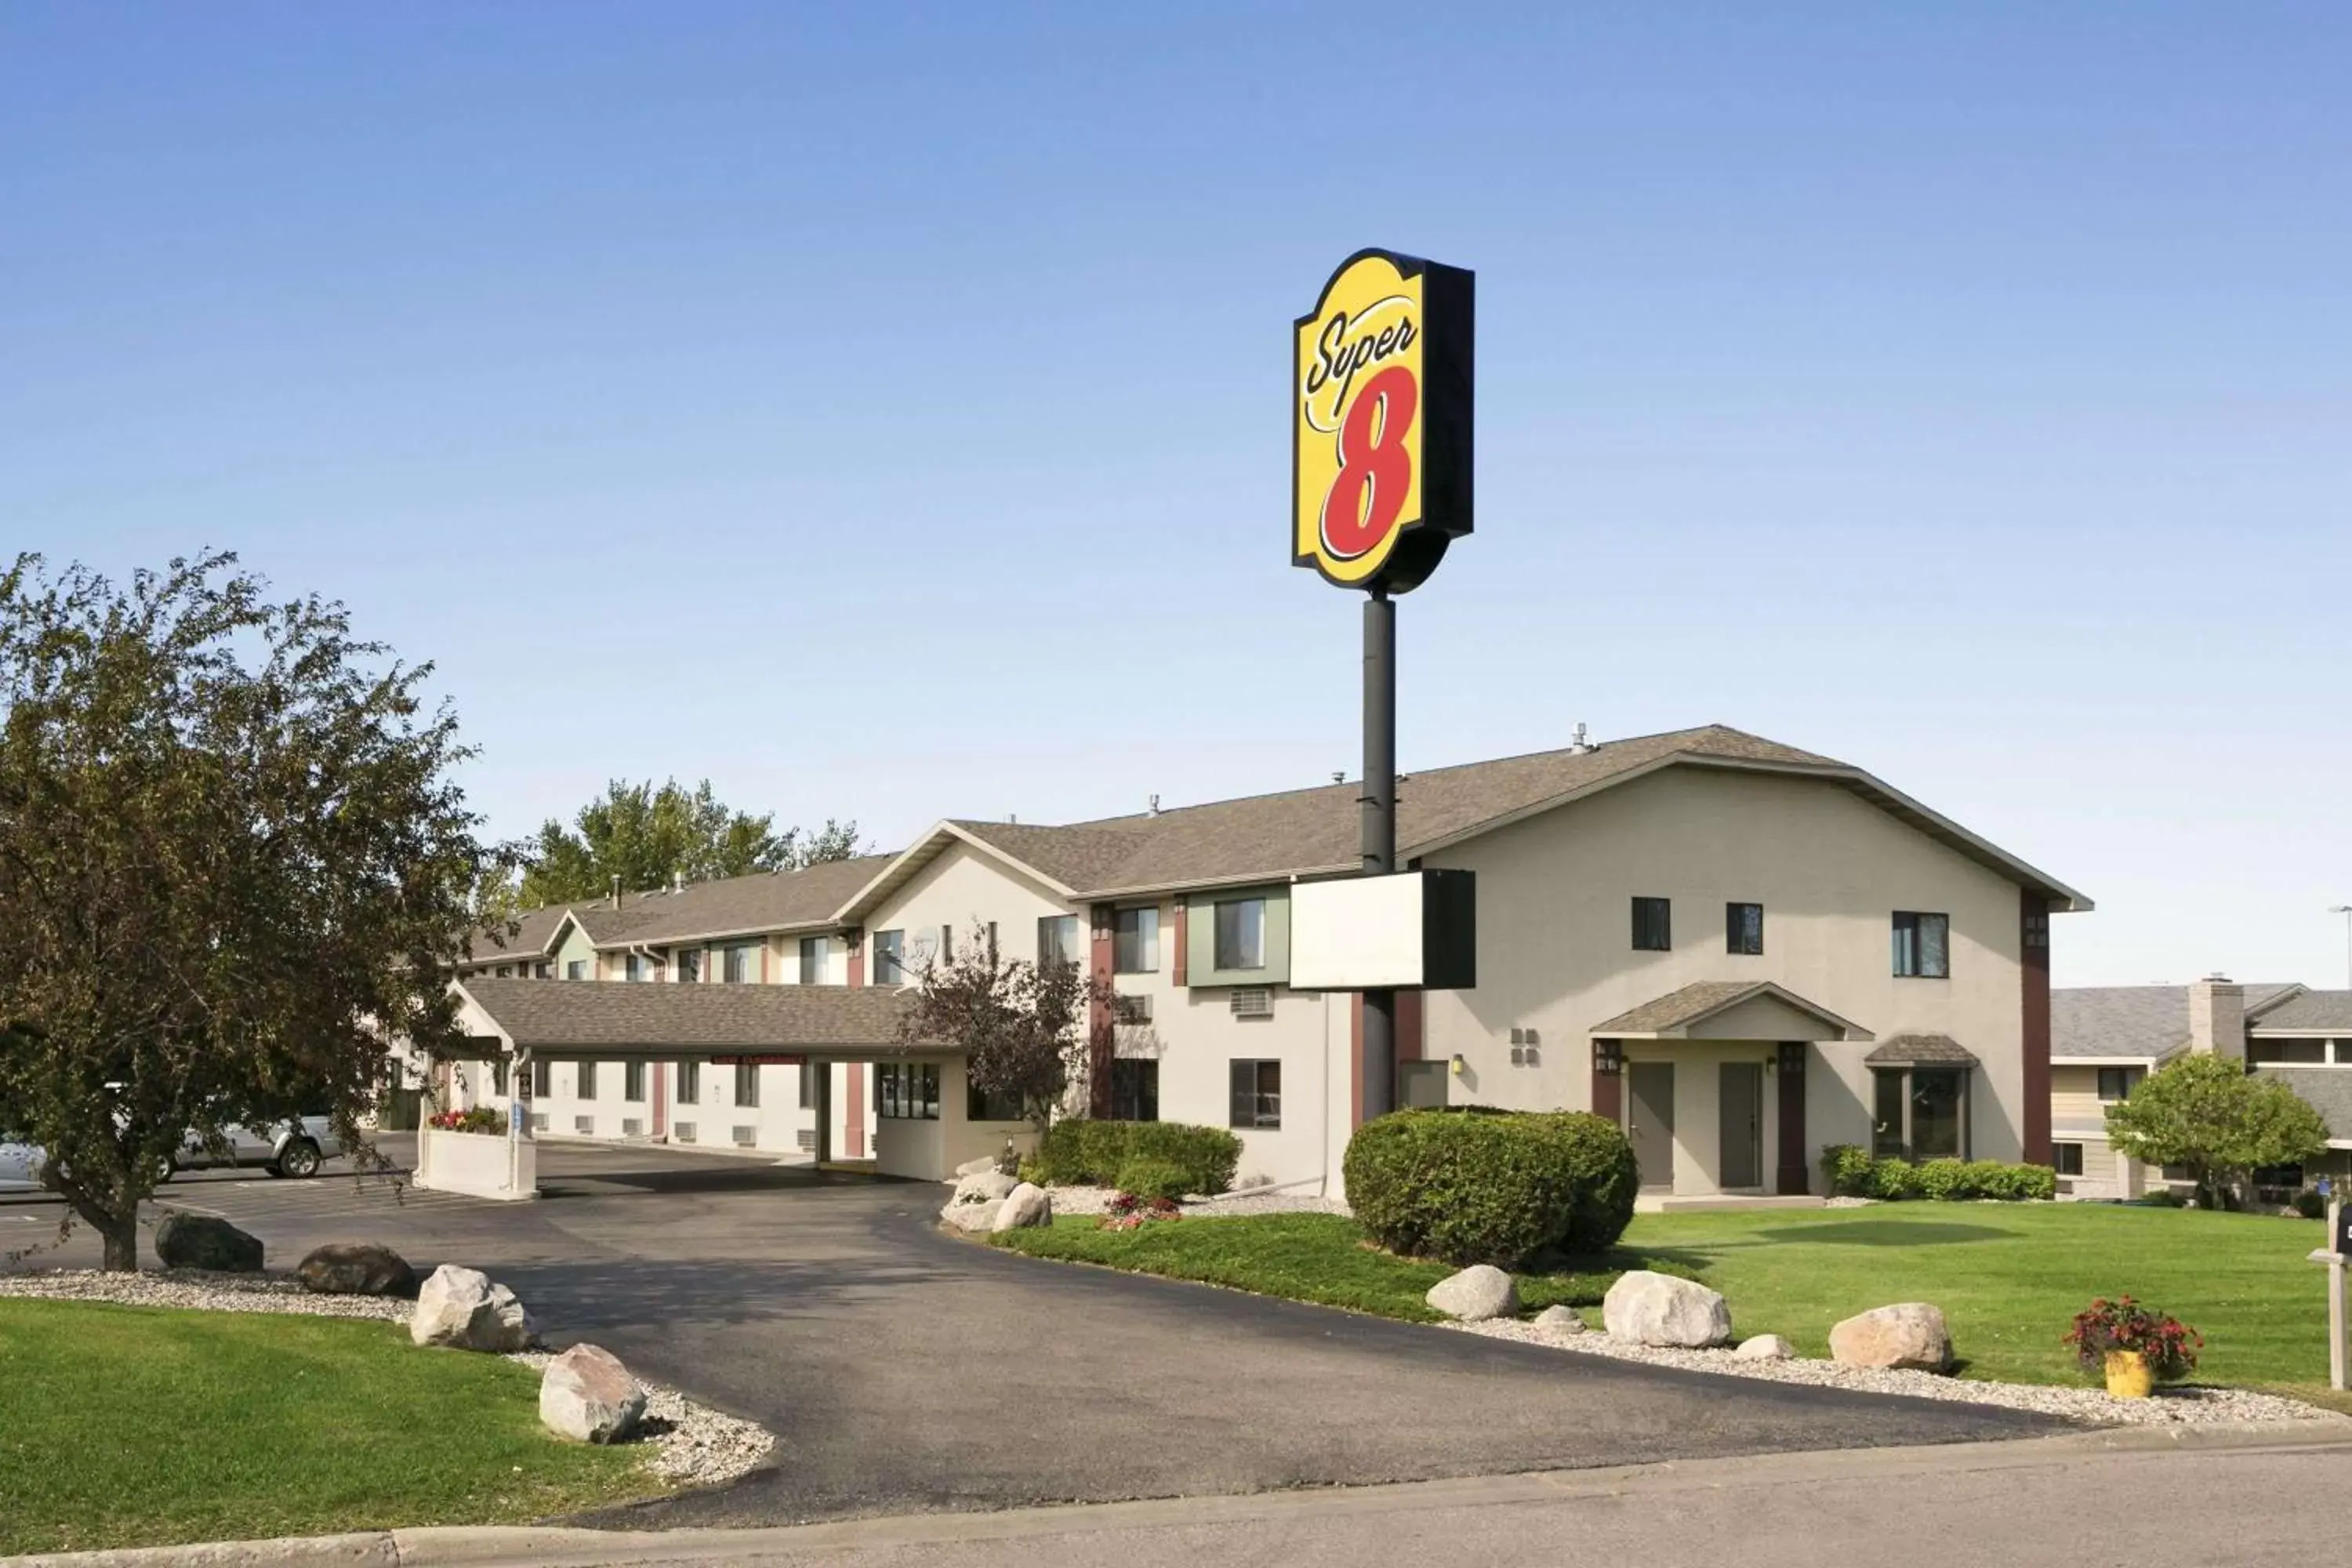 Property Building in Super 8 by Wyndham Alexandria MN